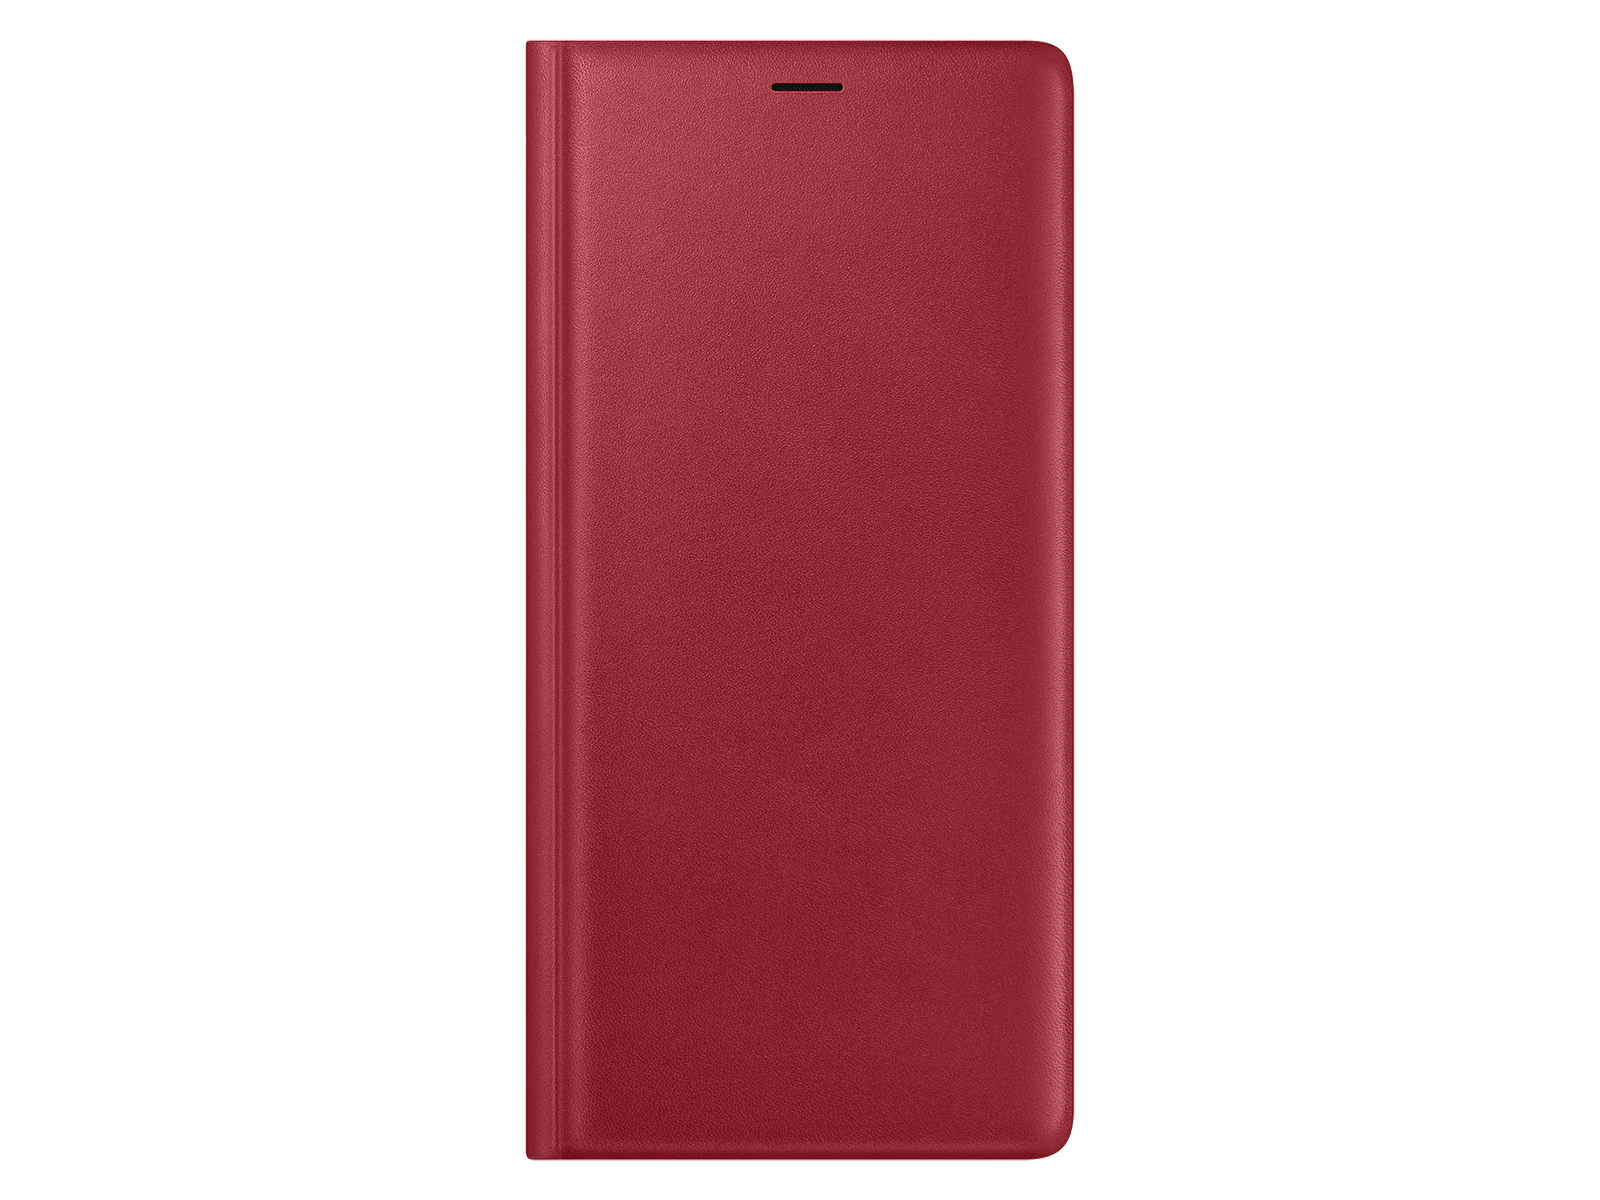 Samsung Leather Wallet Cover for Galaxy Note 9 - Red